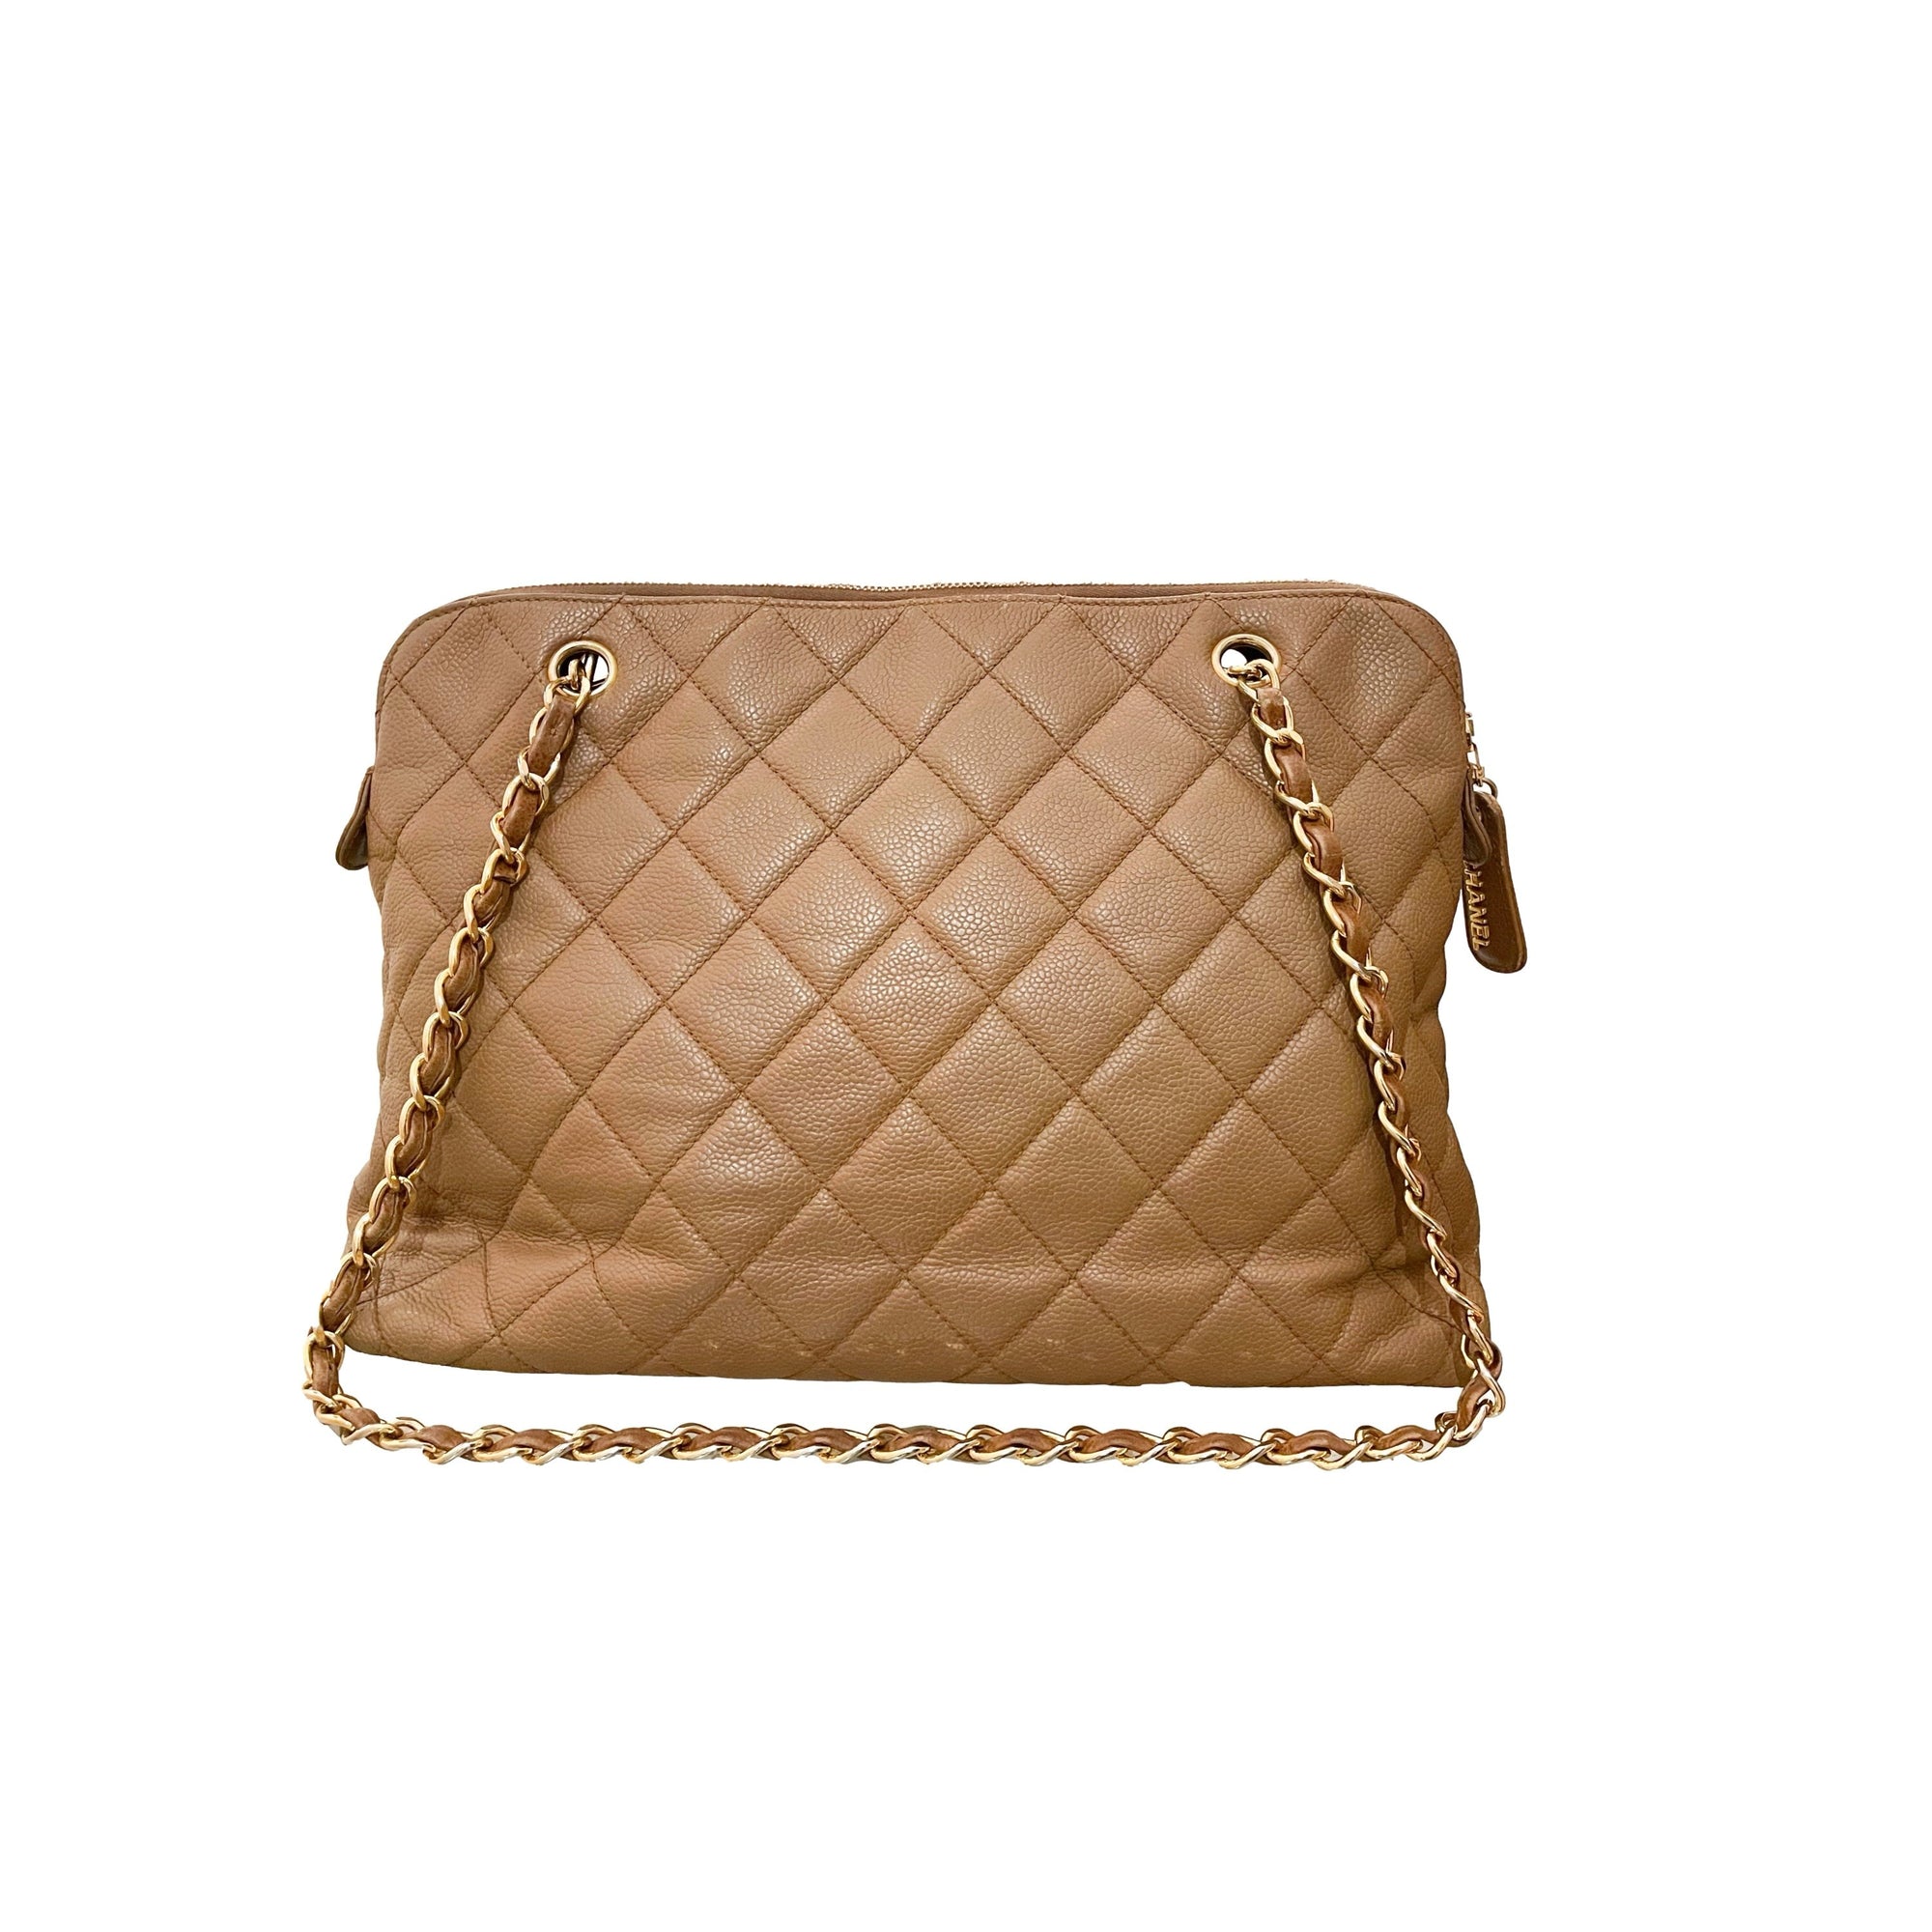 Chanel Tan Quilted Chain Shoulder Bag - Handbags